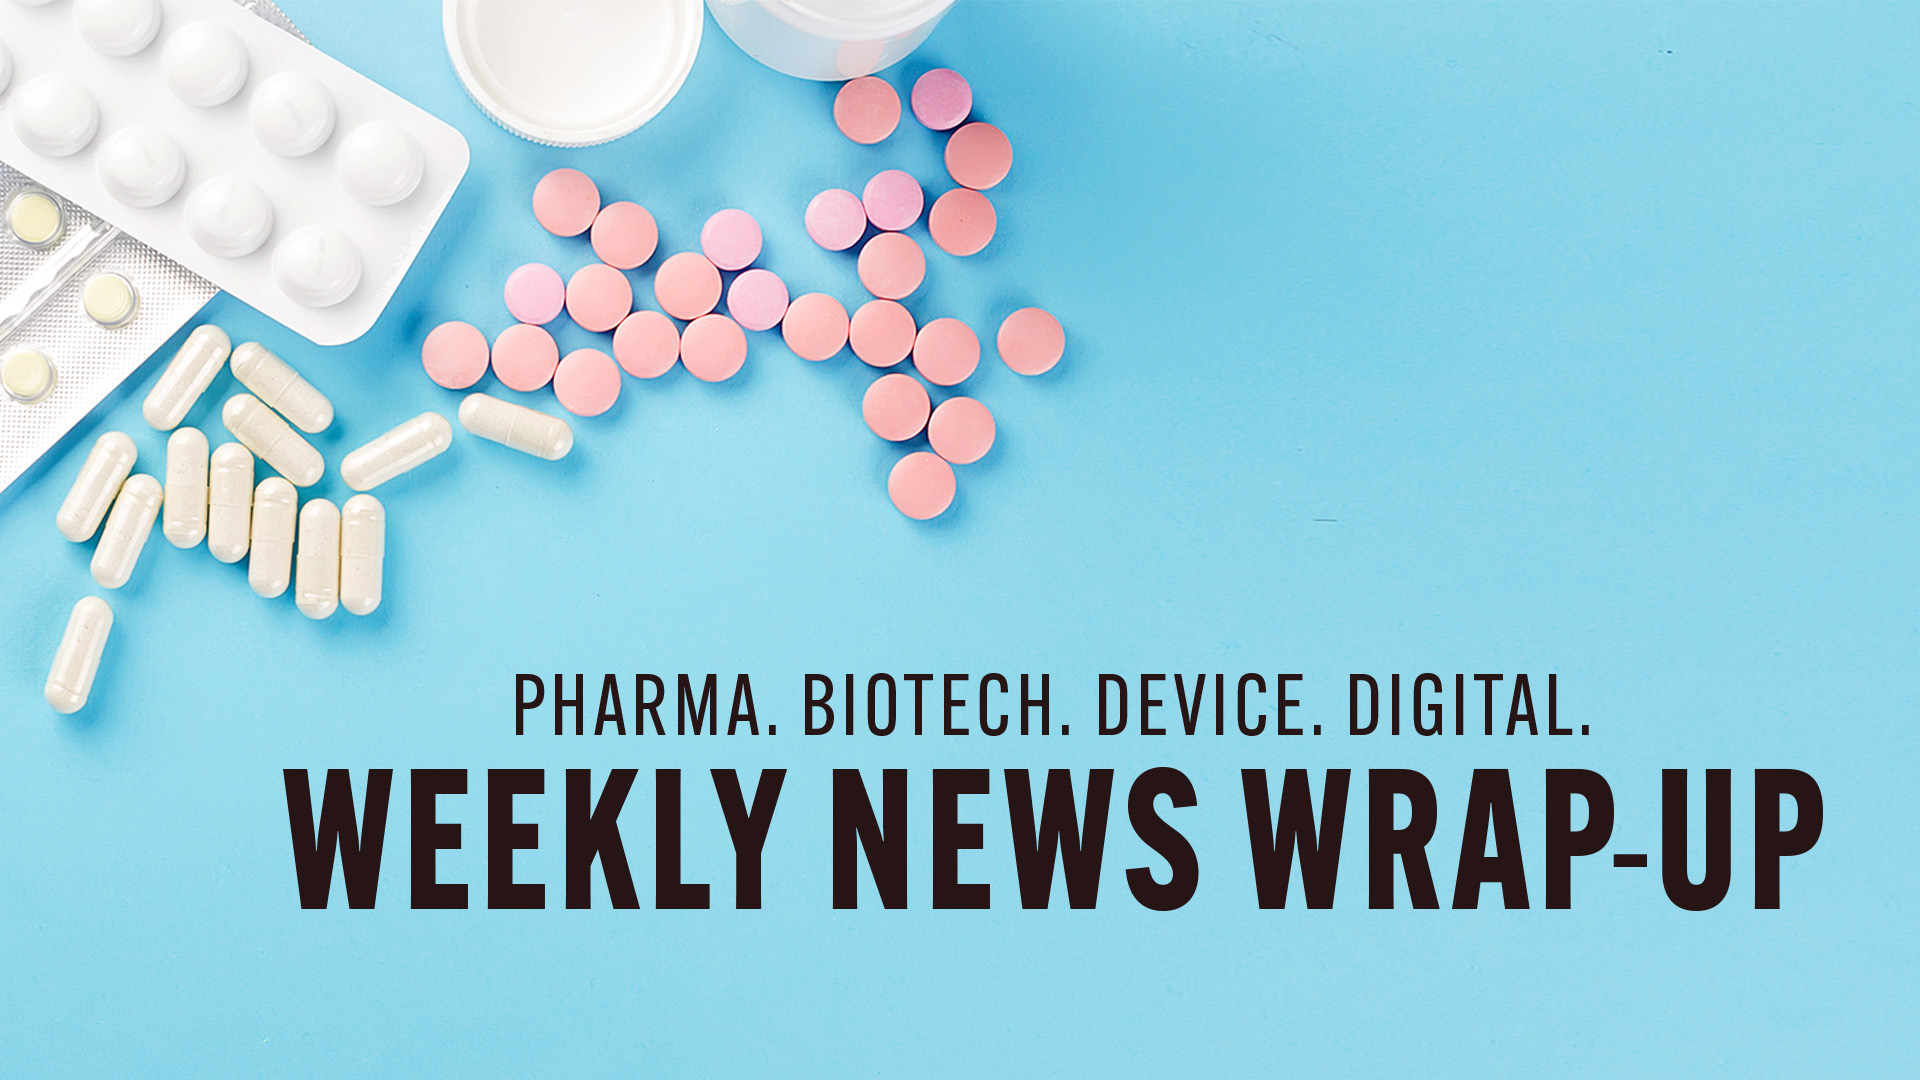 Healthcare Industry News Weekly Wrap-Up: September 23, 2022